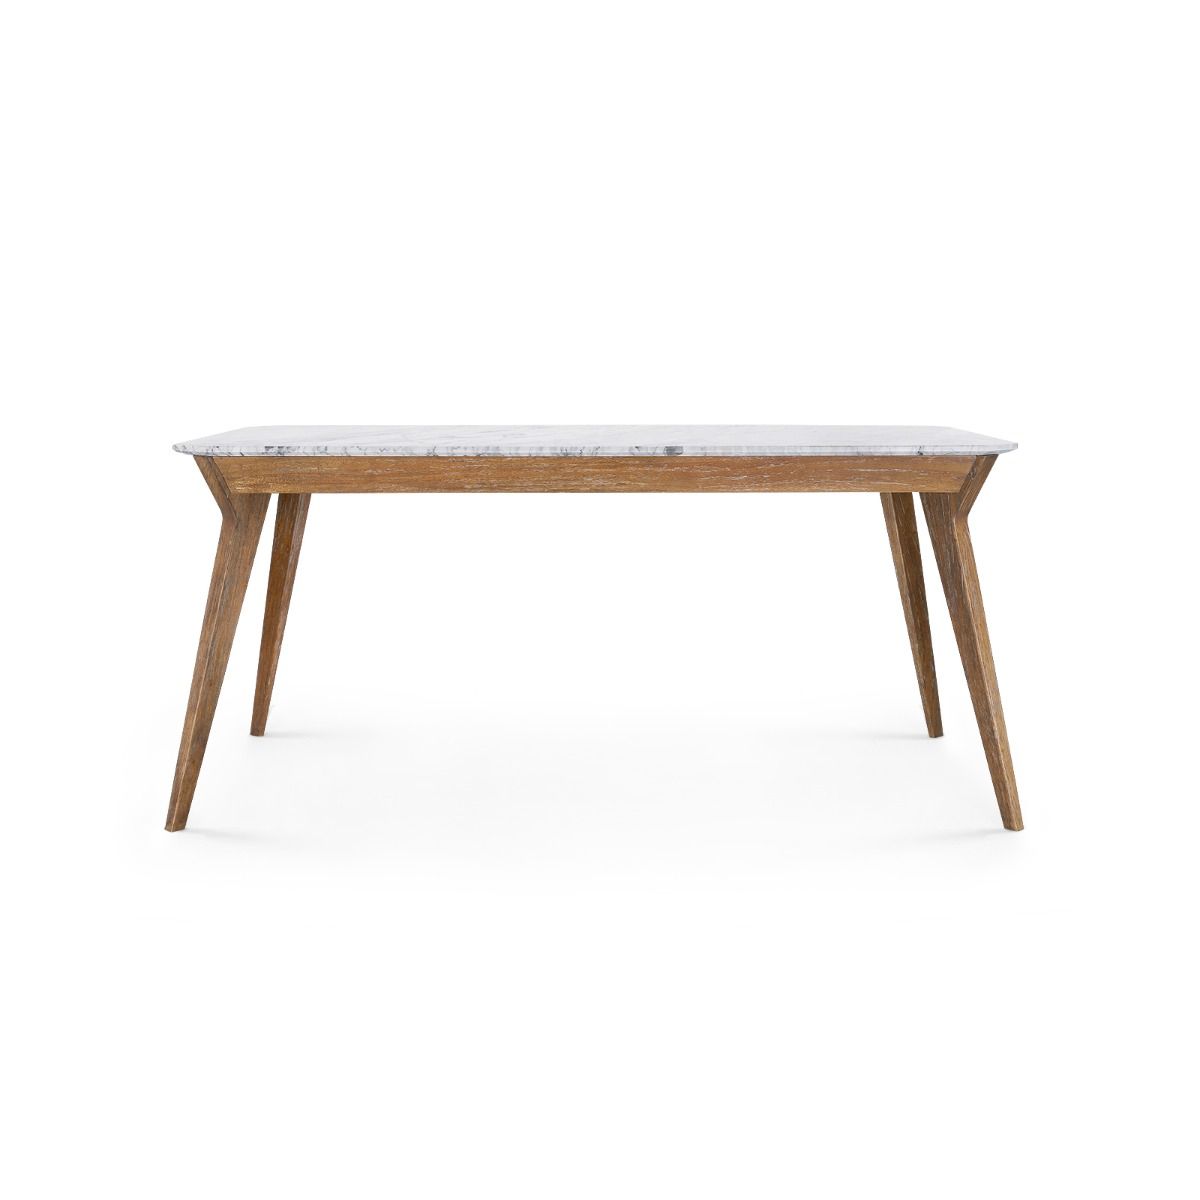 Load image into Gallery viewer, Reed Dining Table, Driftwood Table Bungalow 5     Four Hands, Burke Decor, Mid Century Modern Furniture, Old Bones Furniture Company, Old Bones Co, Modern Mid Century, Designer Furniture, https://www.oldbonesco.com/
